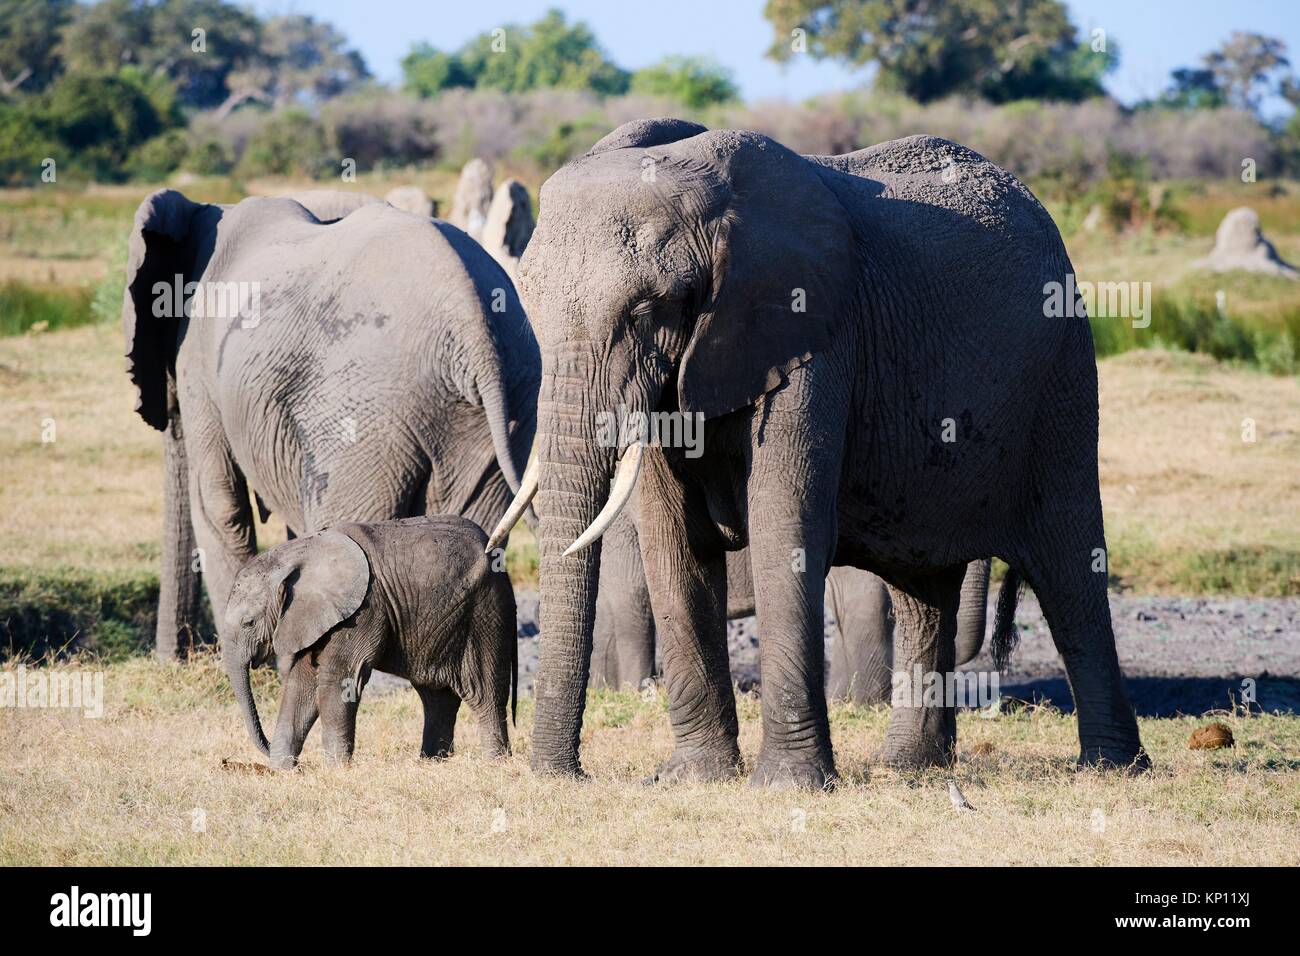 African elephant family with mother and young calf (Loxodonta africana), Duba Plains, Okavango Delta,Botswana, Southern Africa. Stock Photo